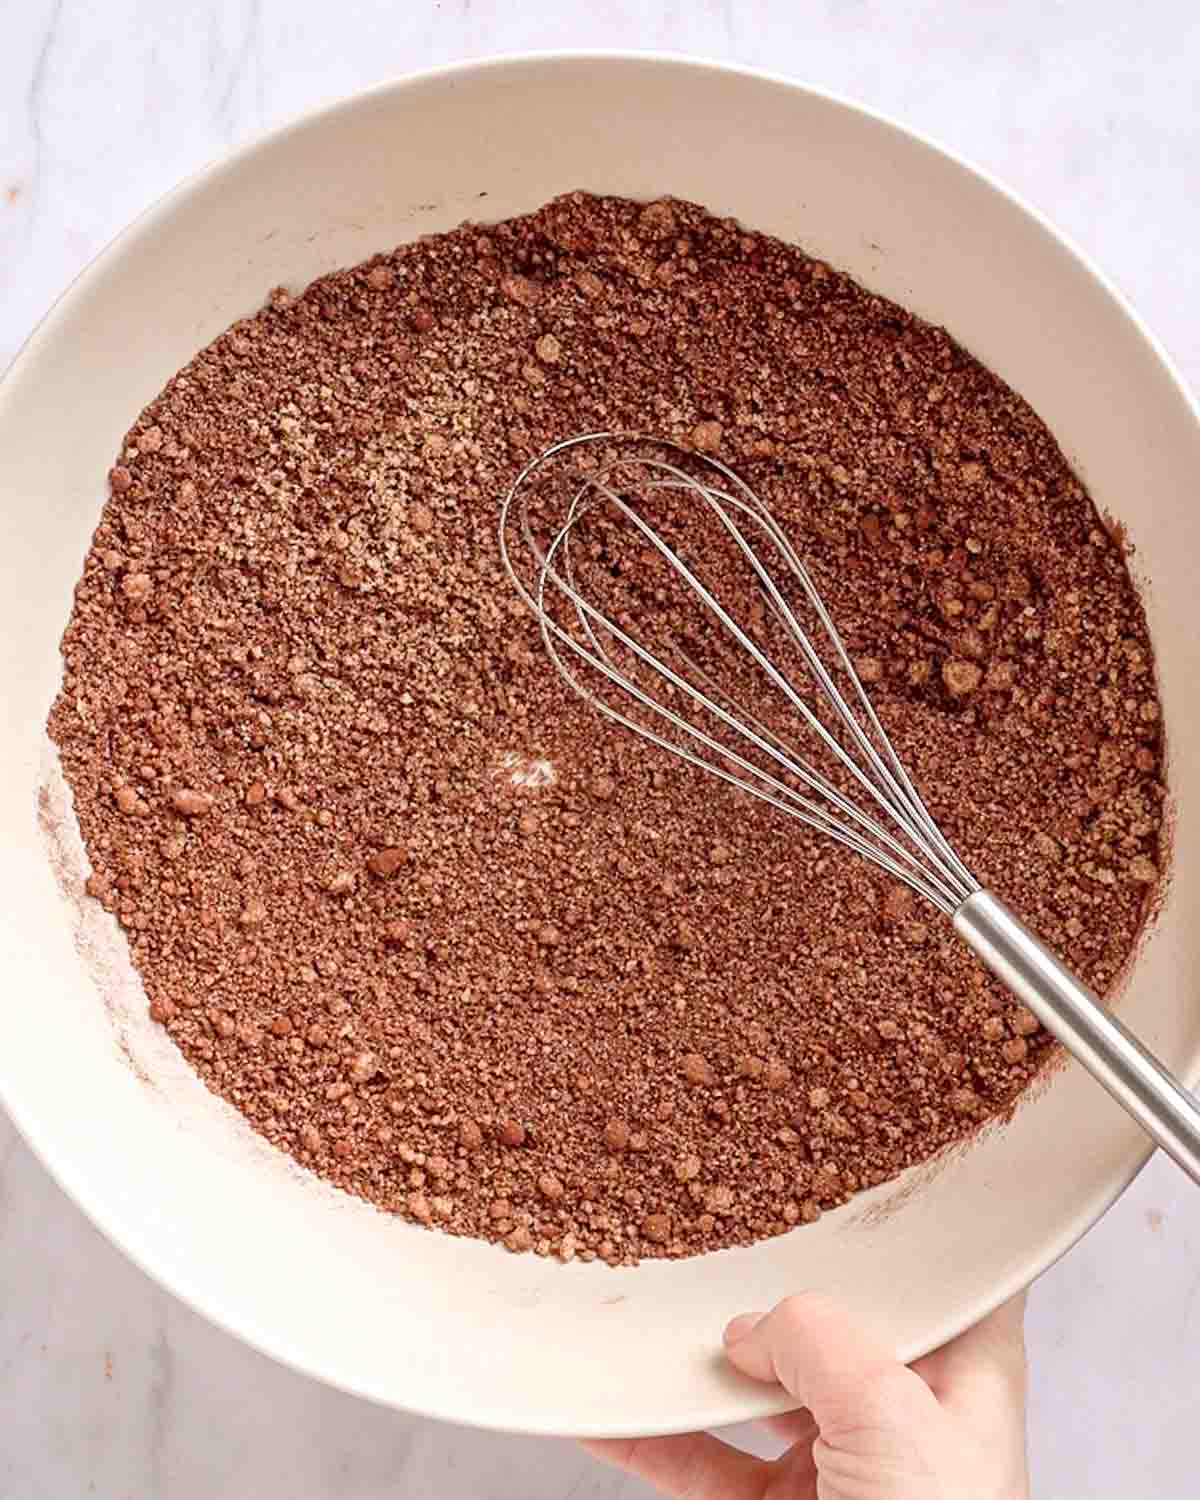 all the dry ingredients for healthy chocolate cookies whisked together in a bowl.